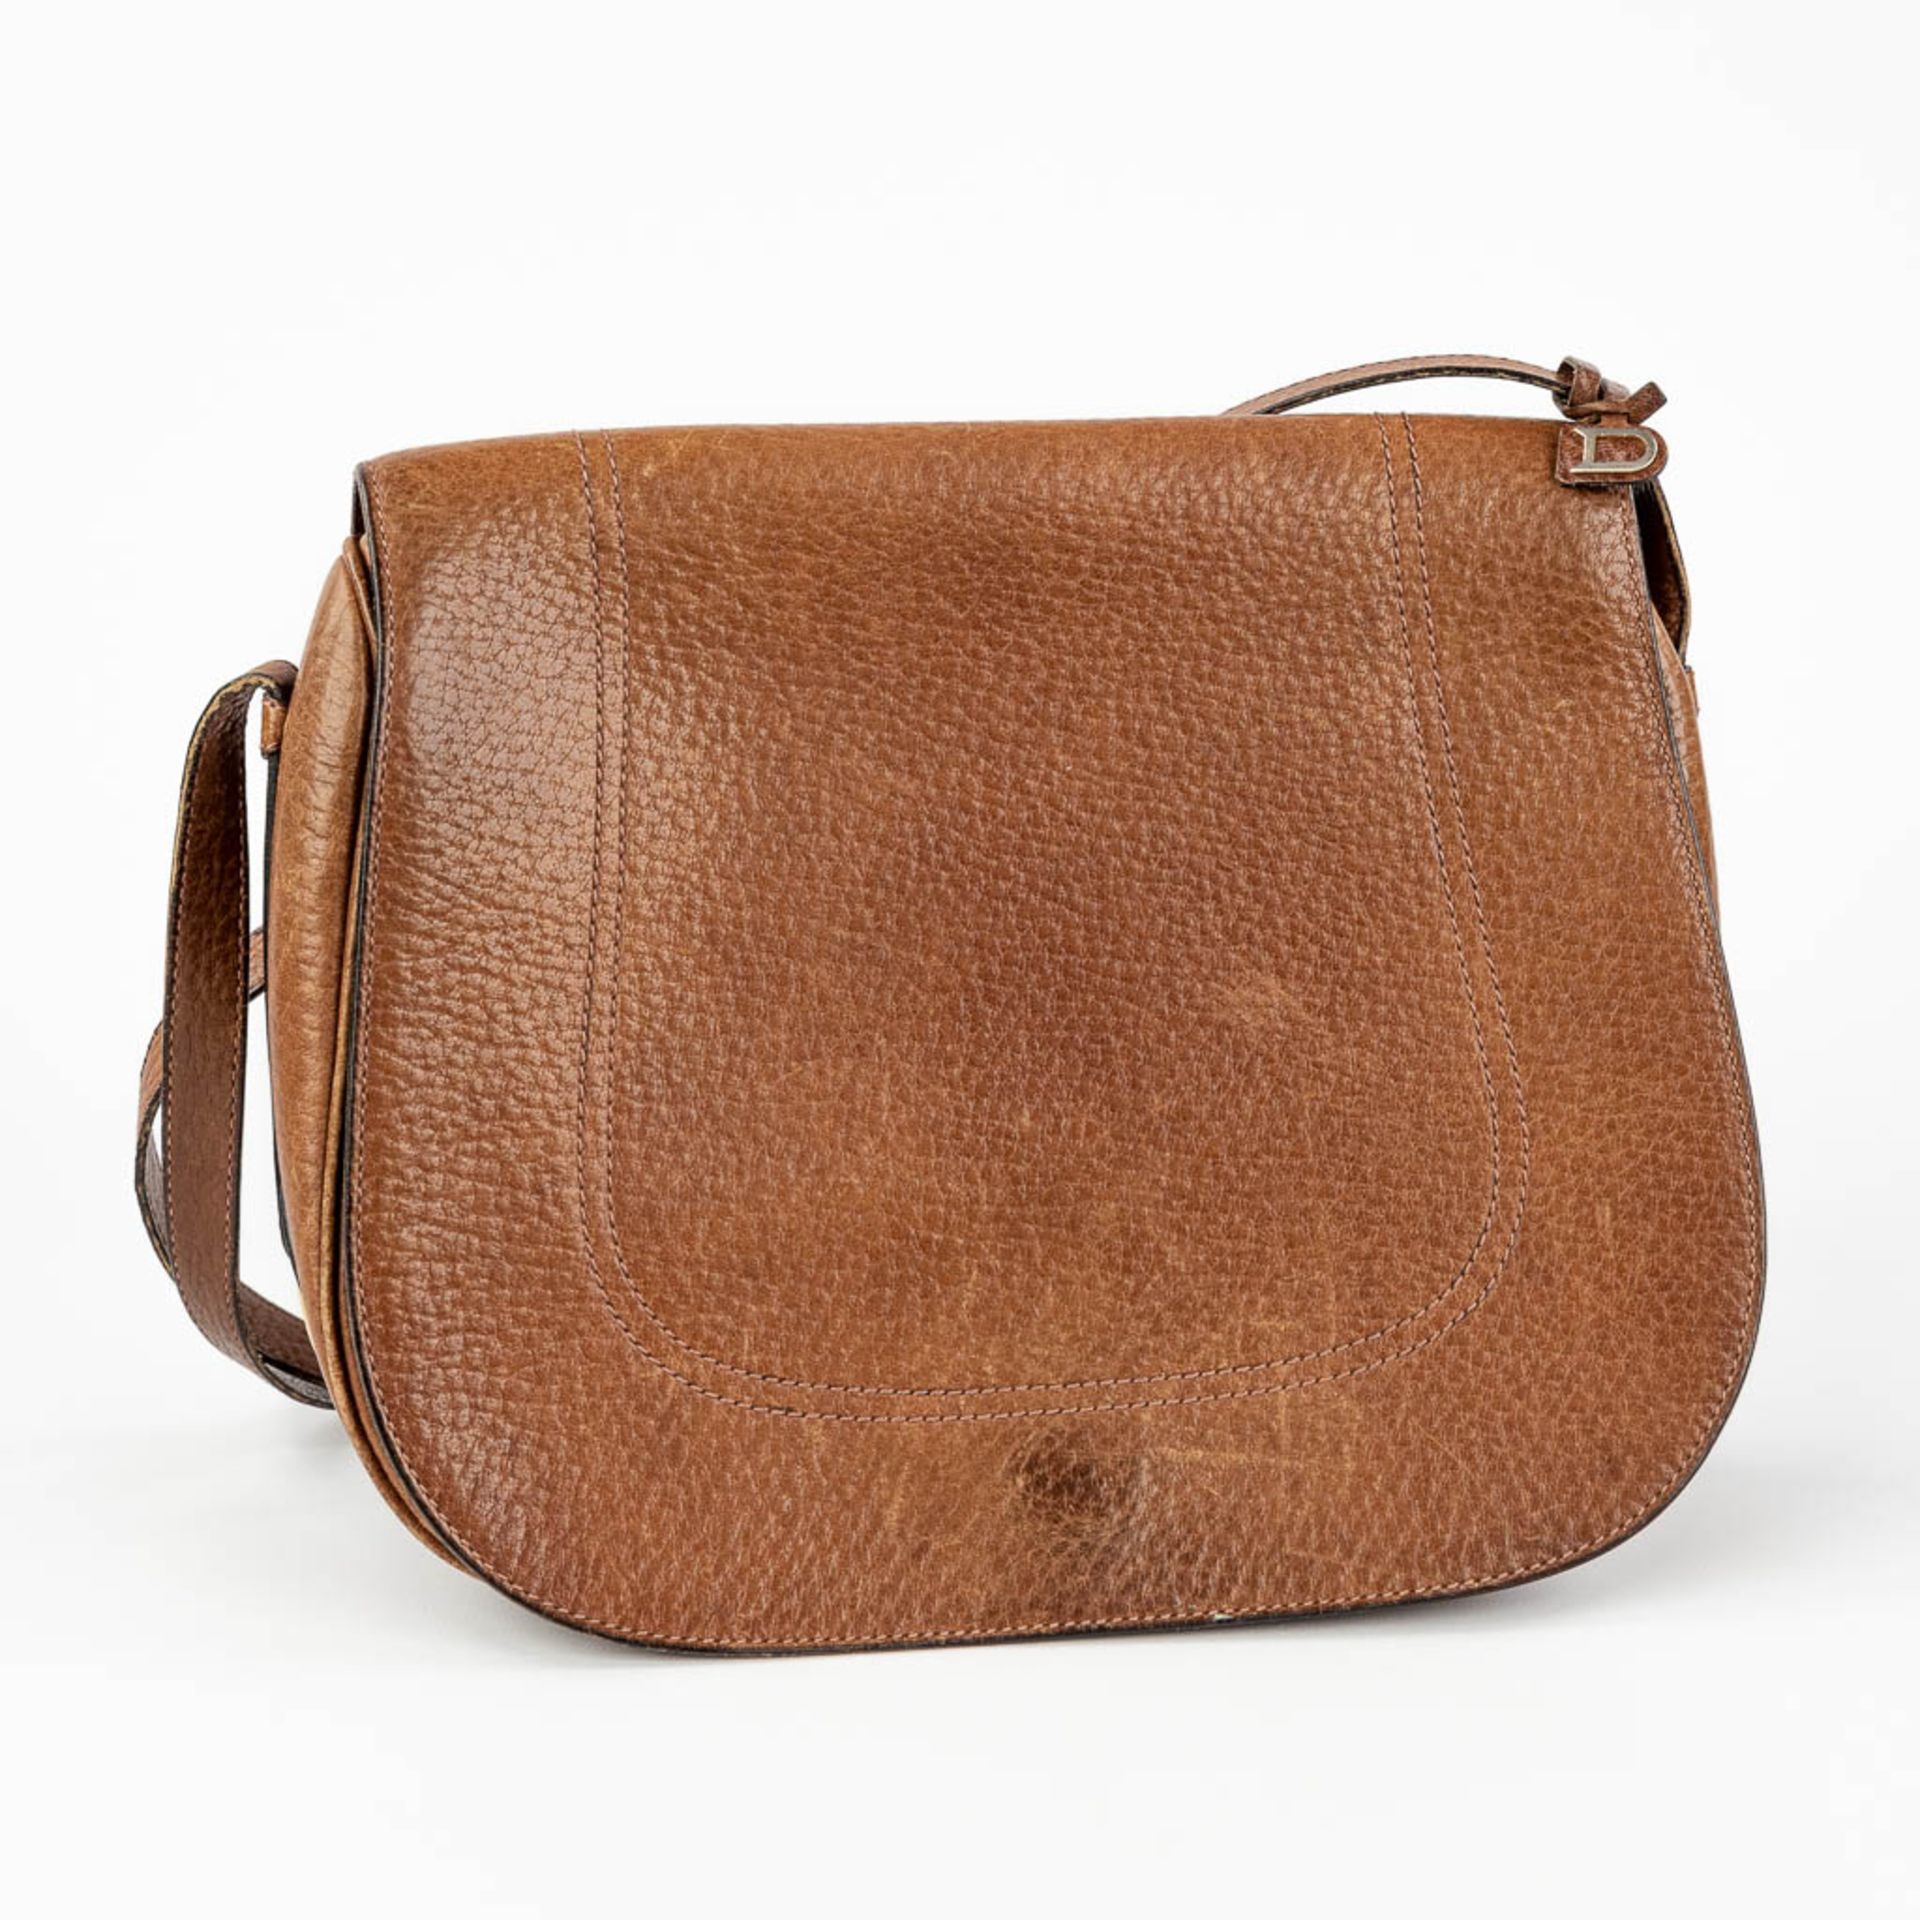 Delvaux, a cross-body handbag made of brown leather. (W:26 x H:22 cm) - Image 9 of 16